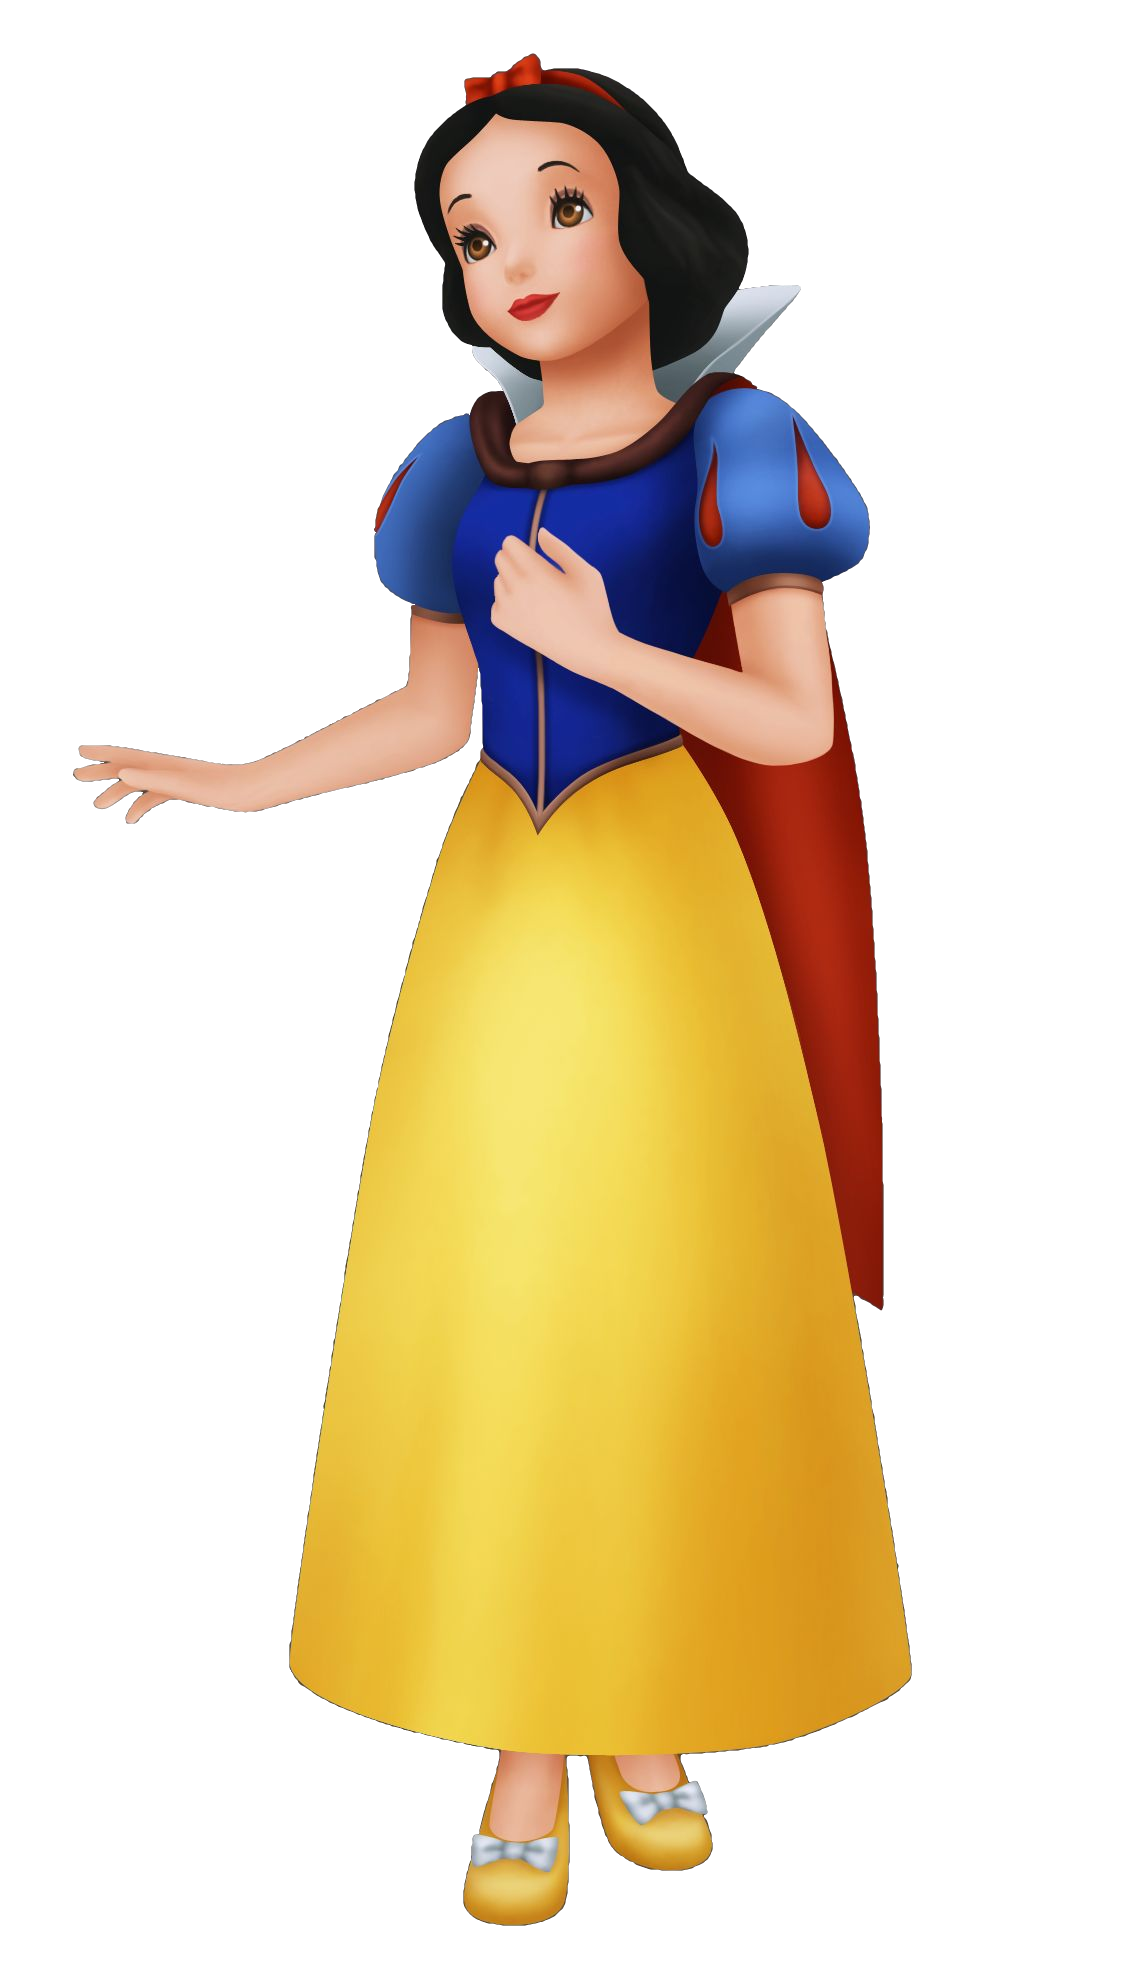 Snow White Photo PNG Image